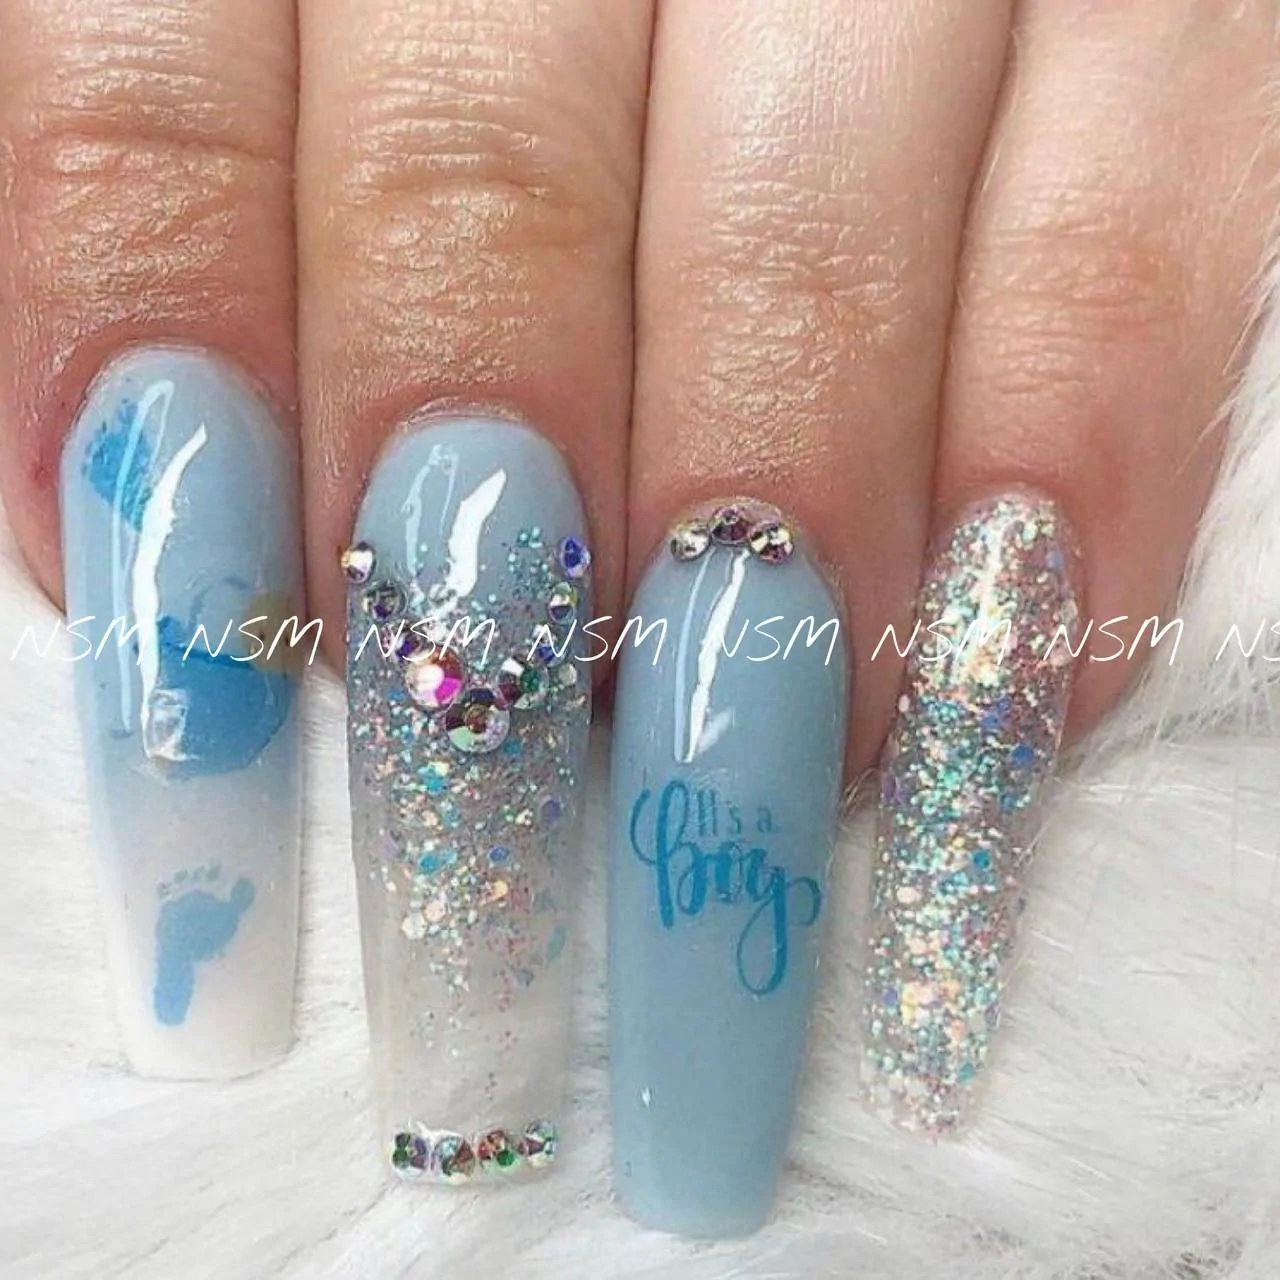 Sheree That Nail Girl - These would be awesome baby shower nails 😍😍 . . .  Products from @nsiuk #thatnailgirl and @blueskyukpro @bluesky_global  #acrylicnails #sculptednails #babyshower #babyshowernails #blueandpink  #blueandpinknails #squarenails ...